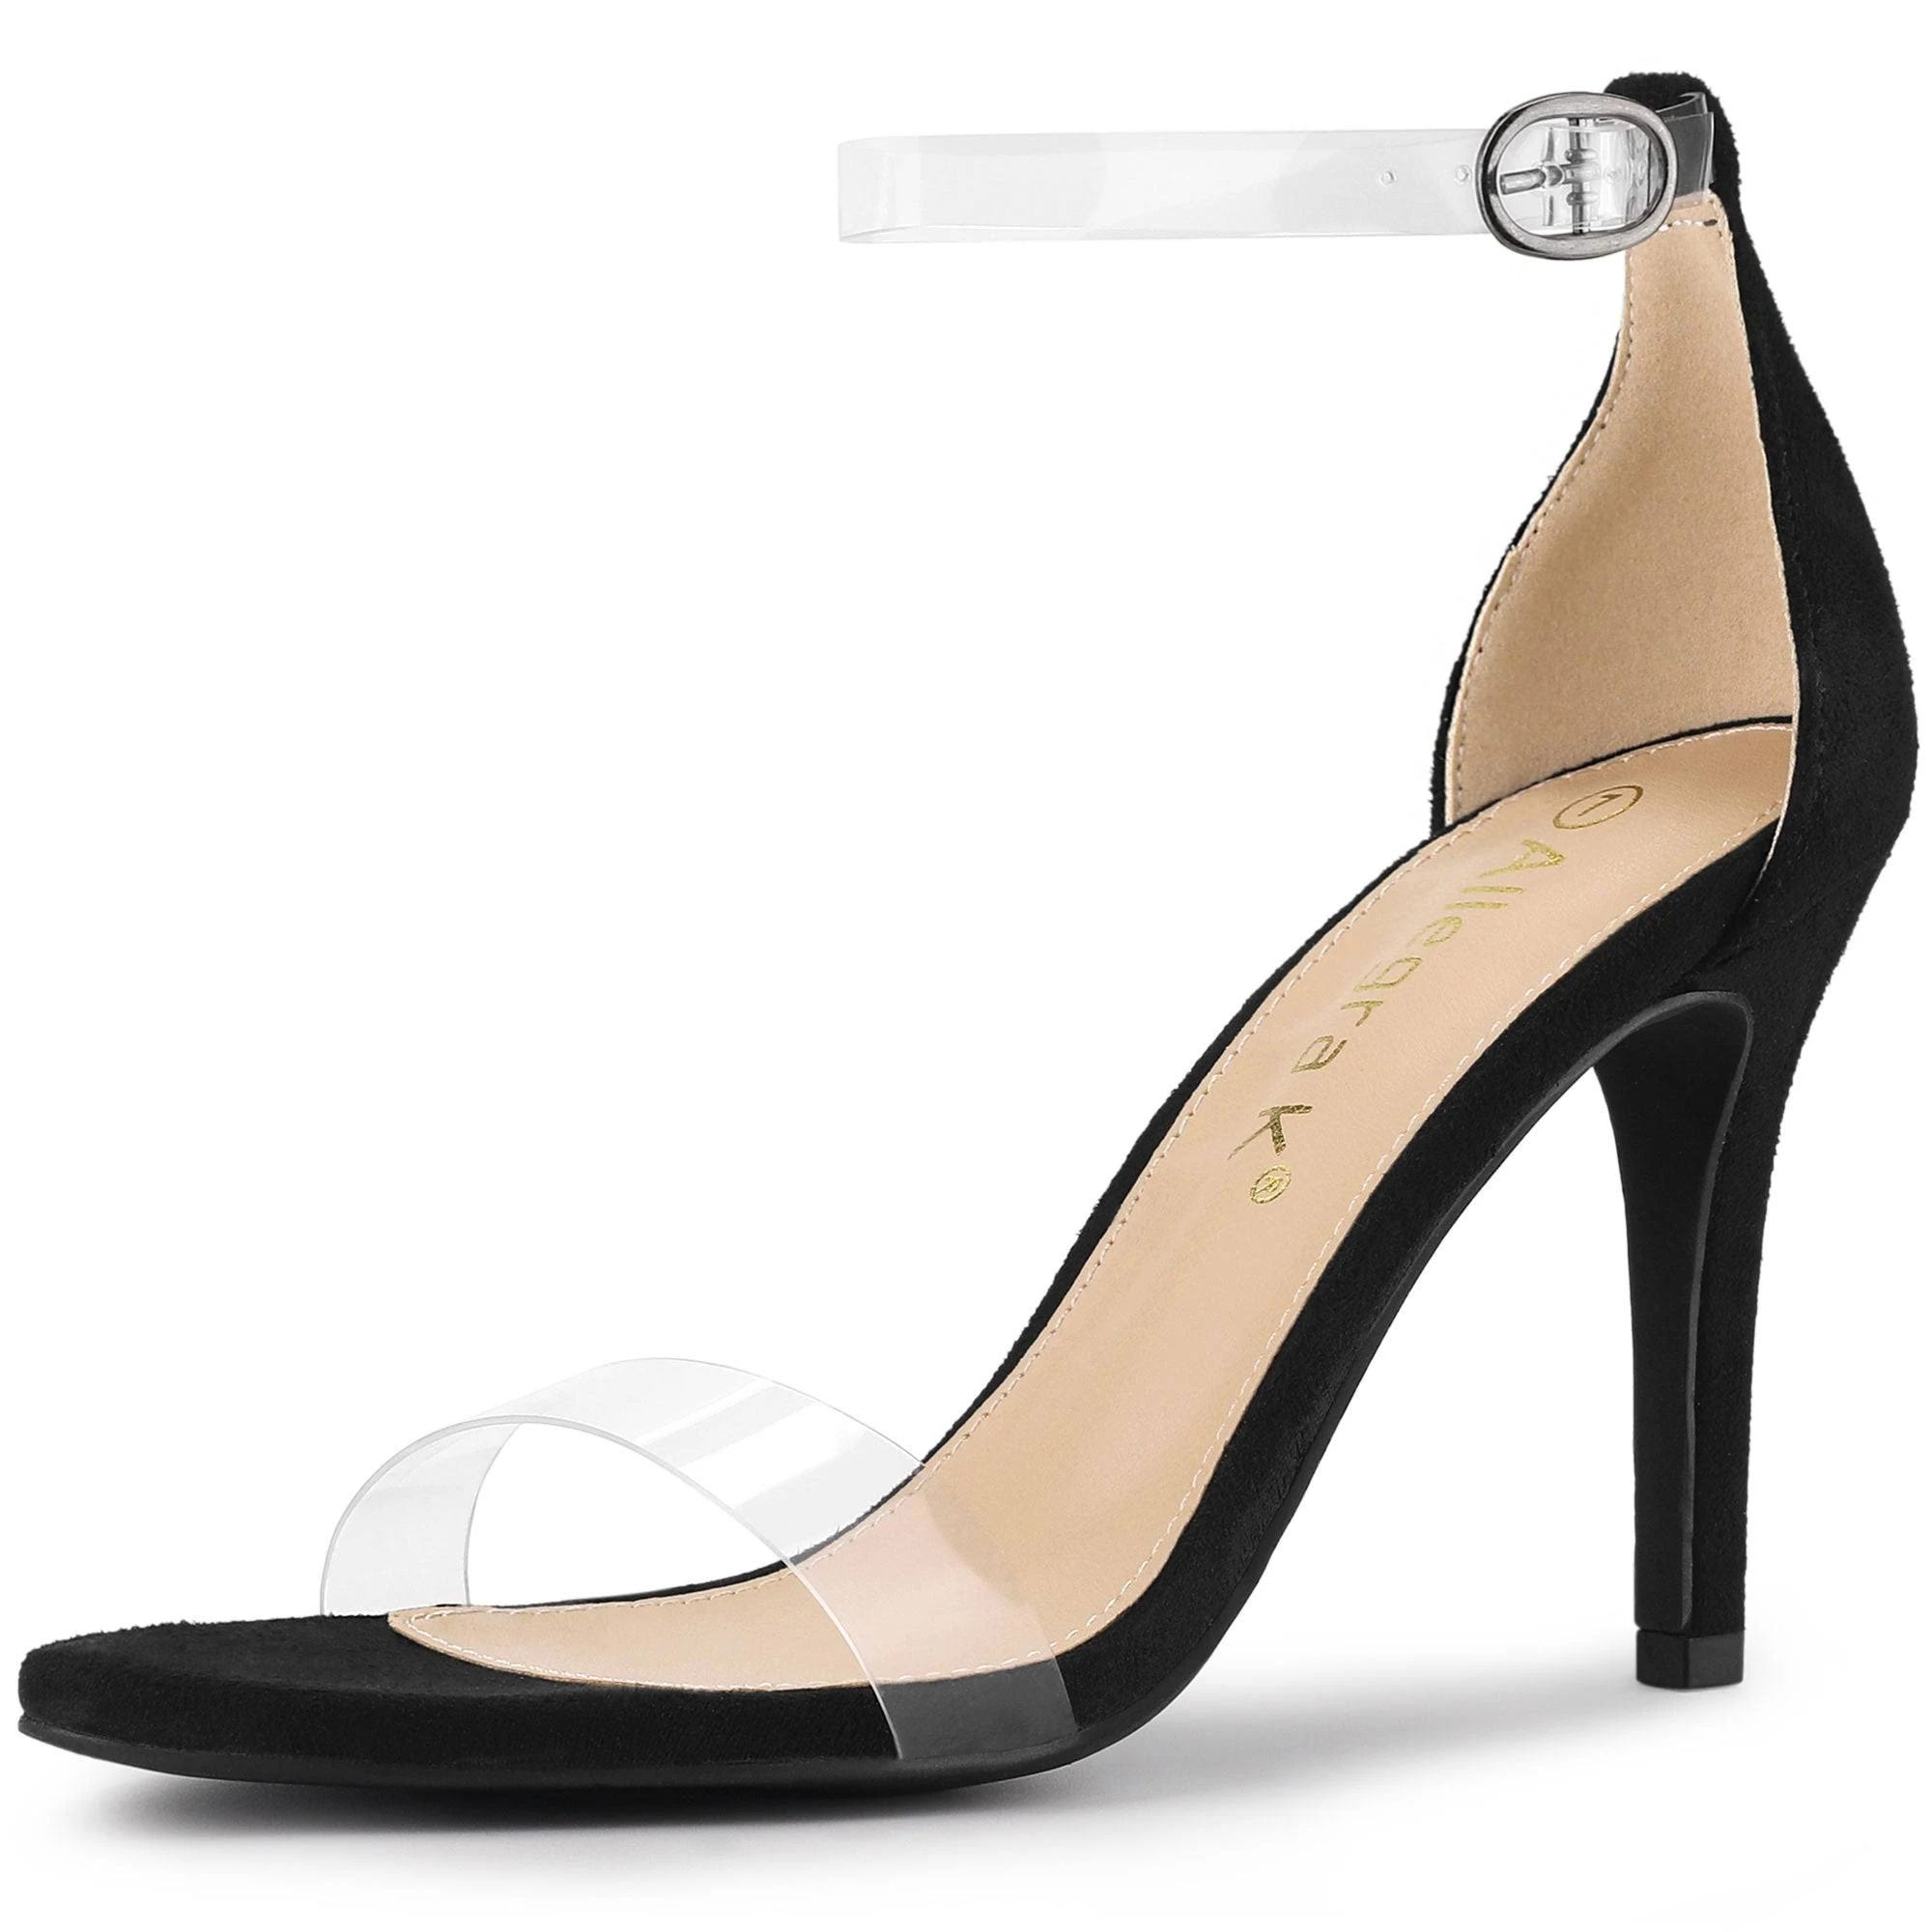 Elegant Clear Strap Stiletto Heel Sandals for Any Occasion | Image